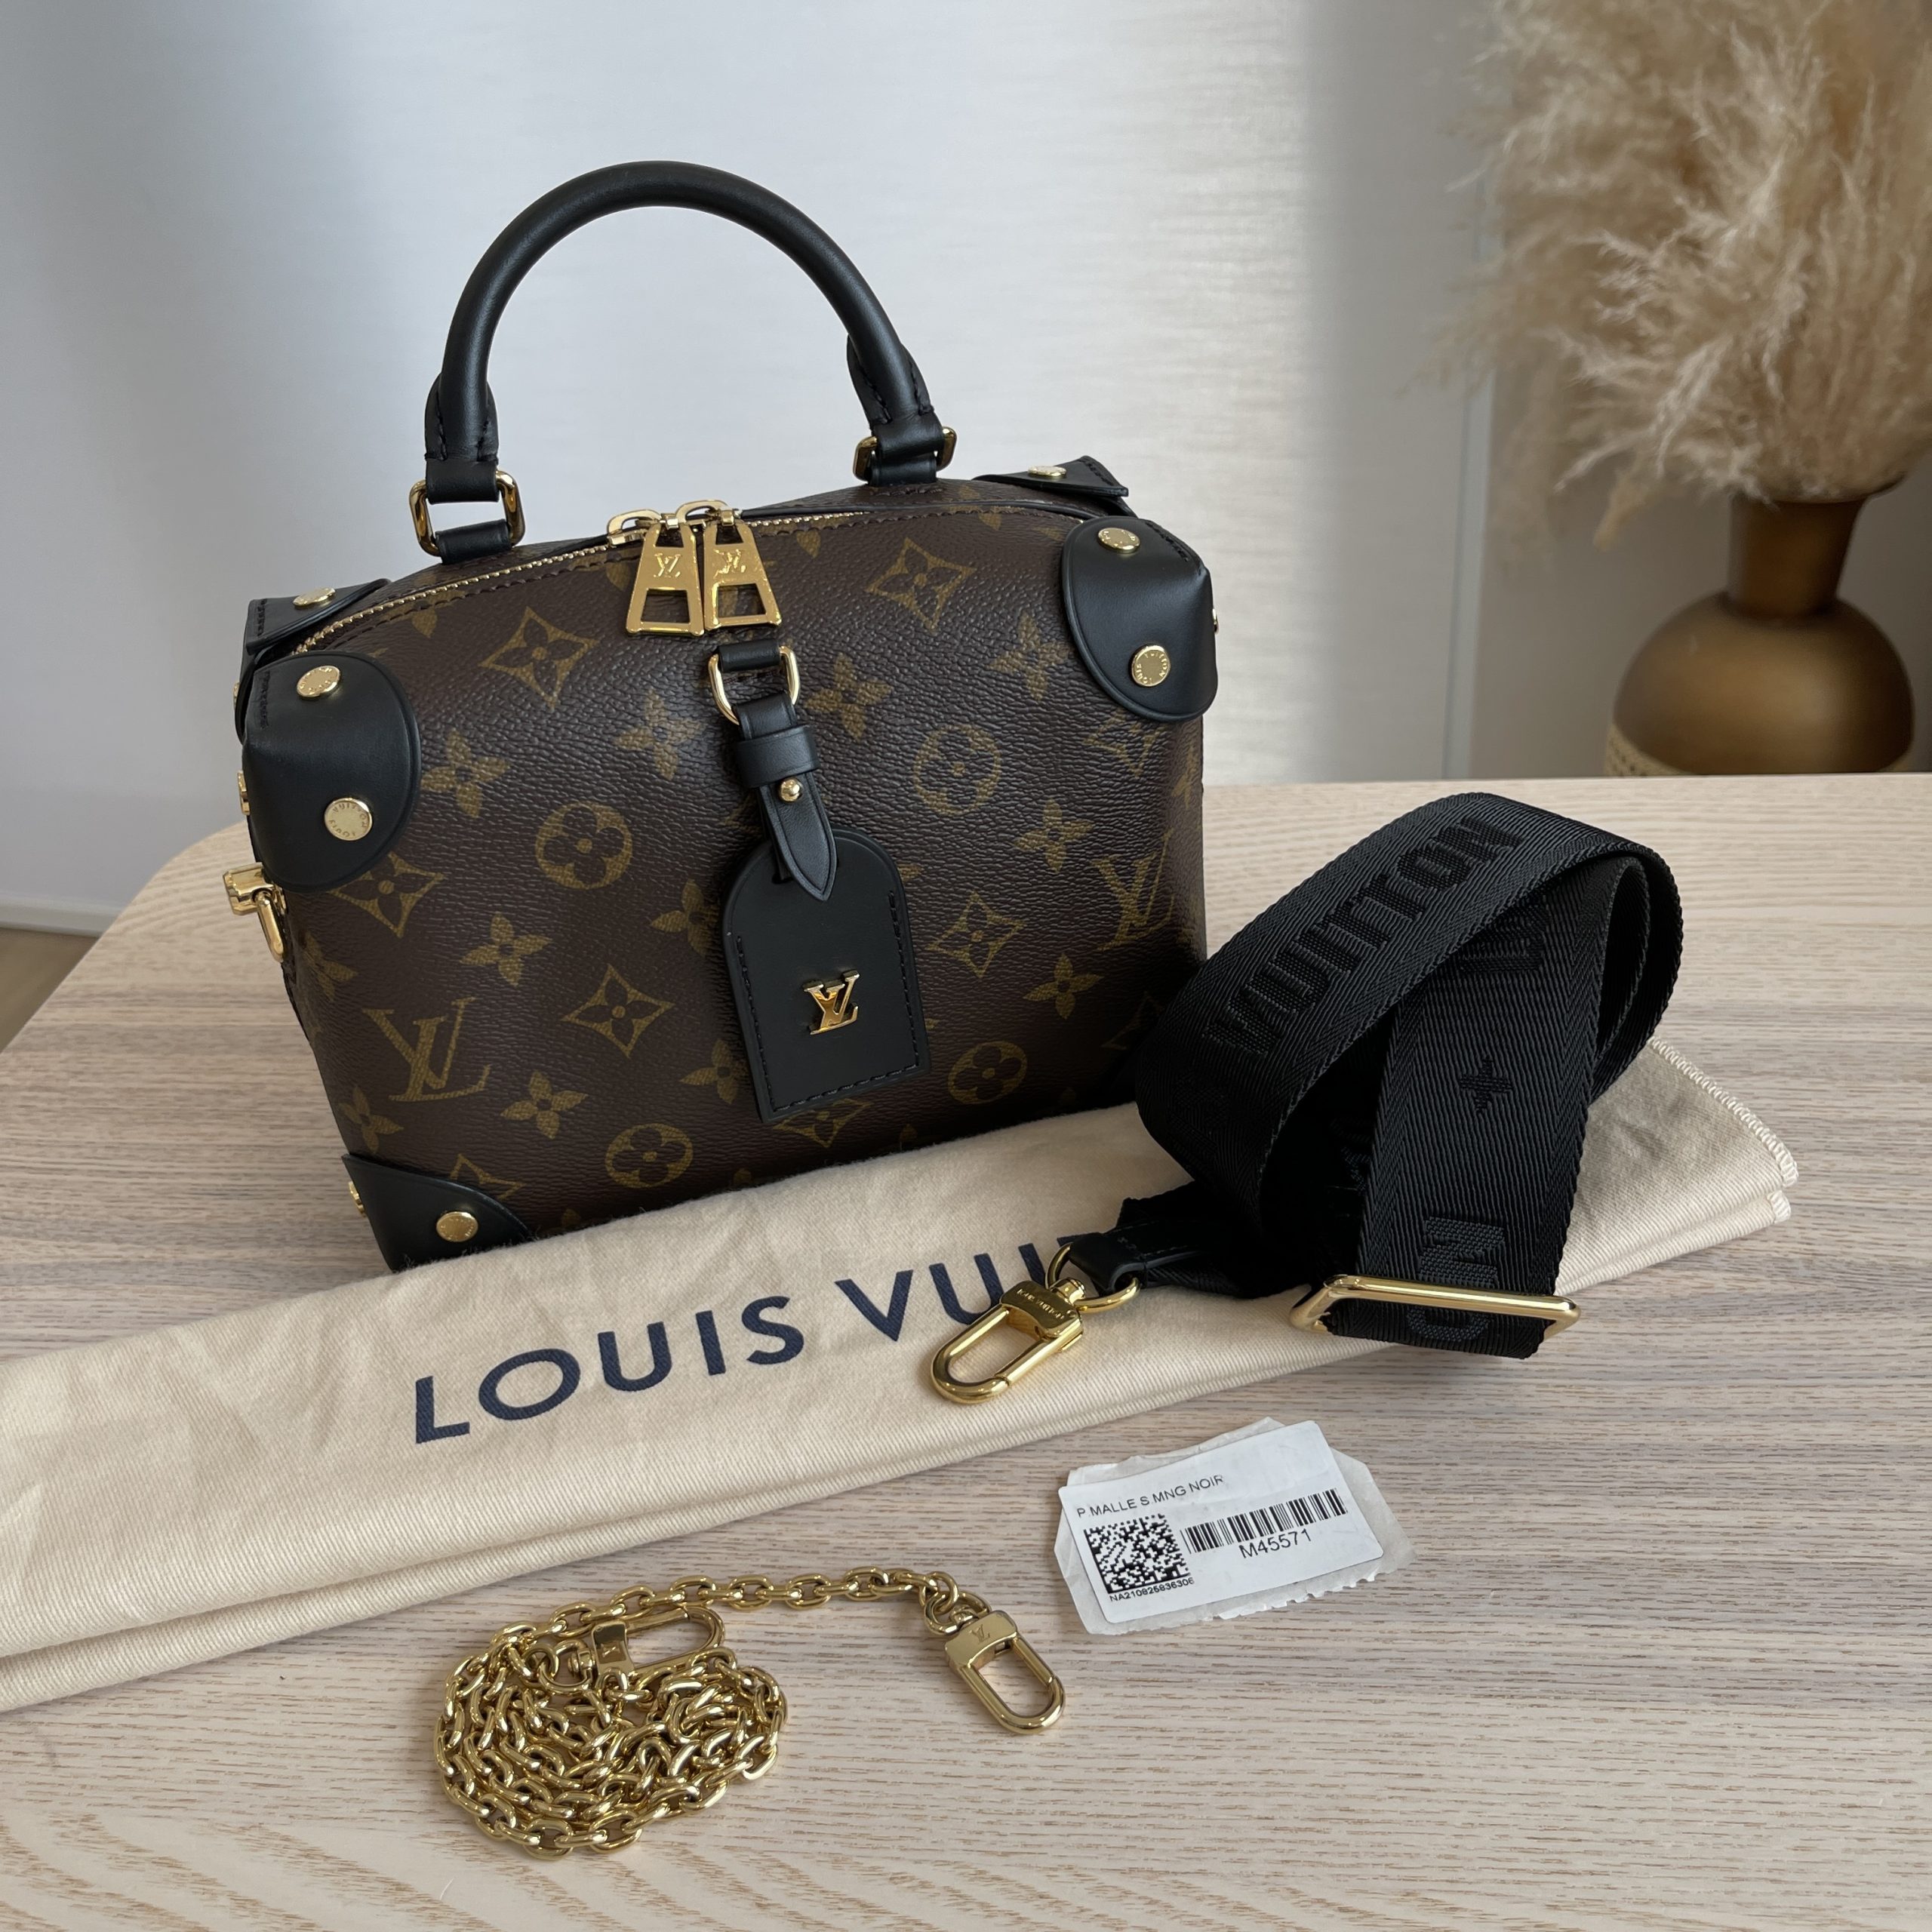 LUXE : LOUIS VUITTON Petite Malle Souple Black 🖤, Gallery posted by  кнєѕуιηιι